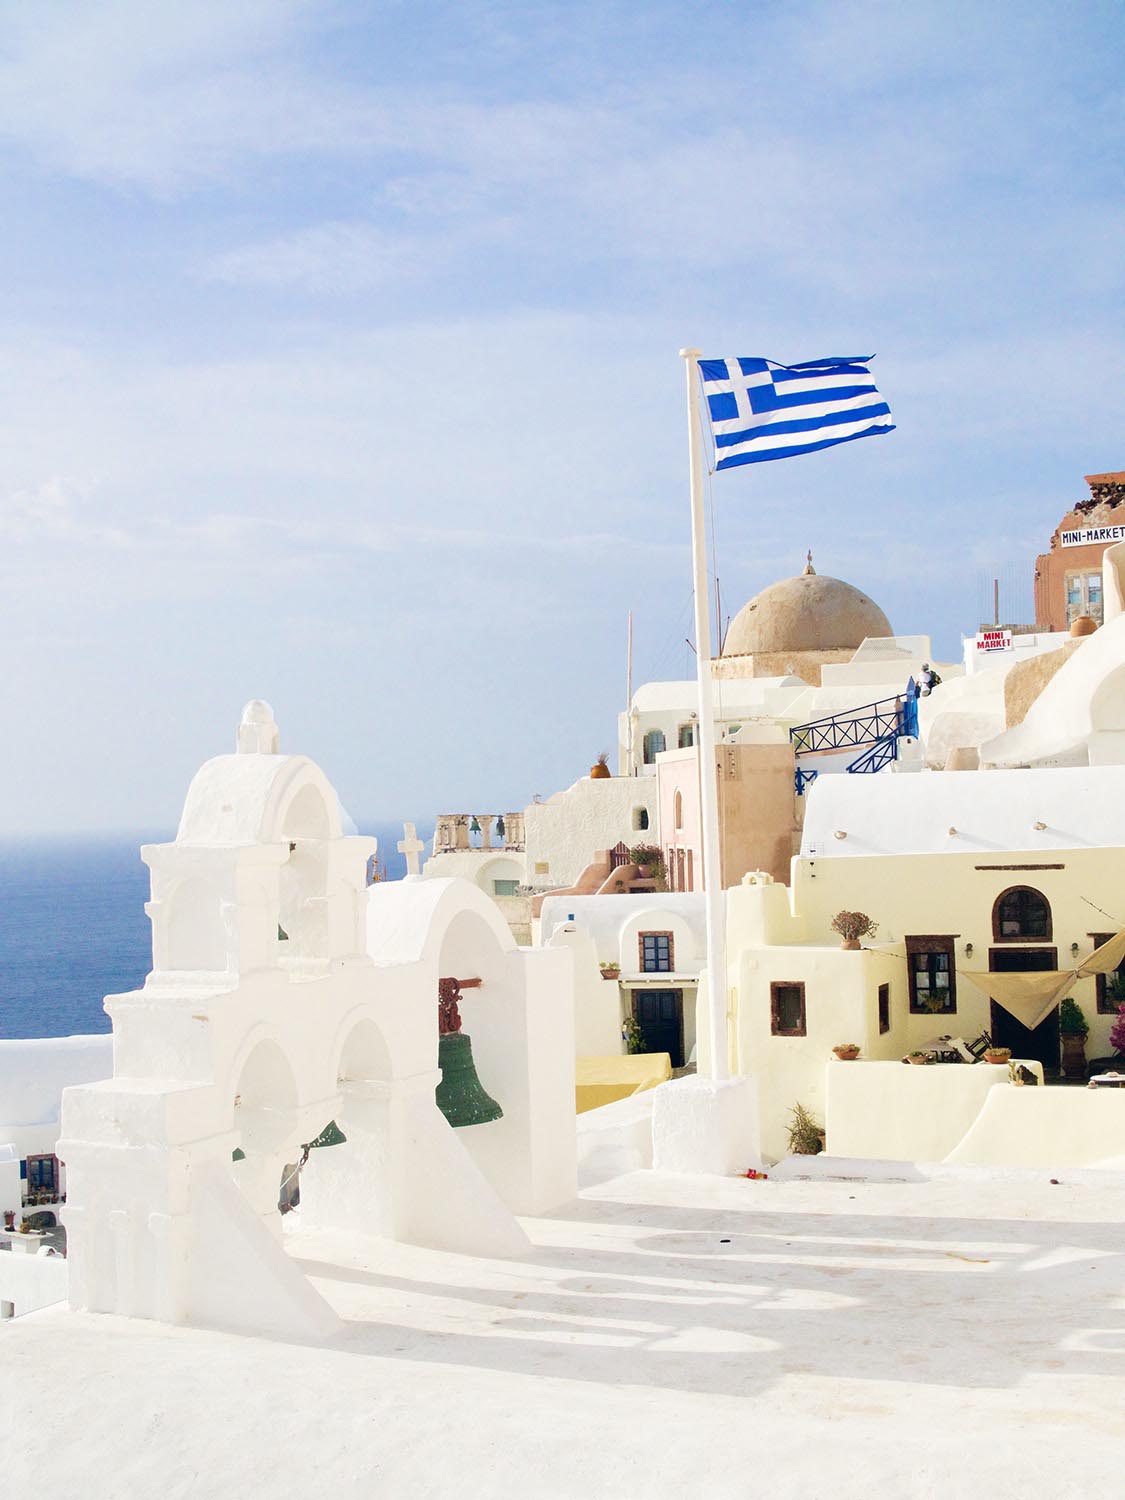 Things to do in Greece - Santorini travel guide